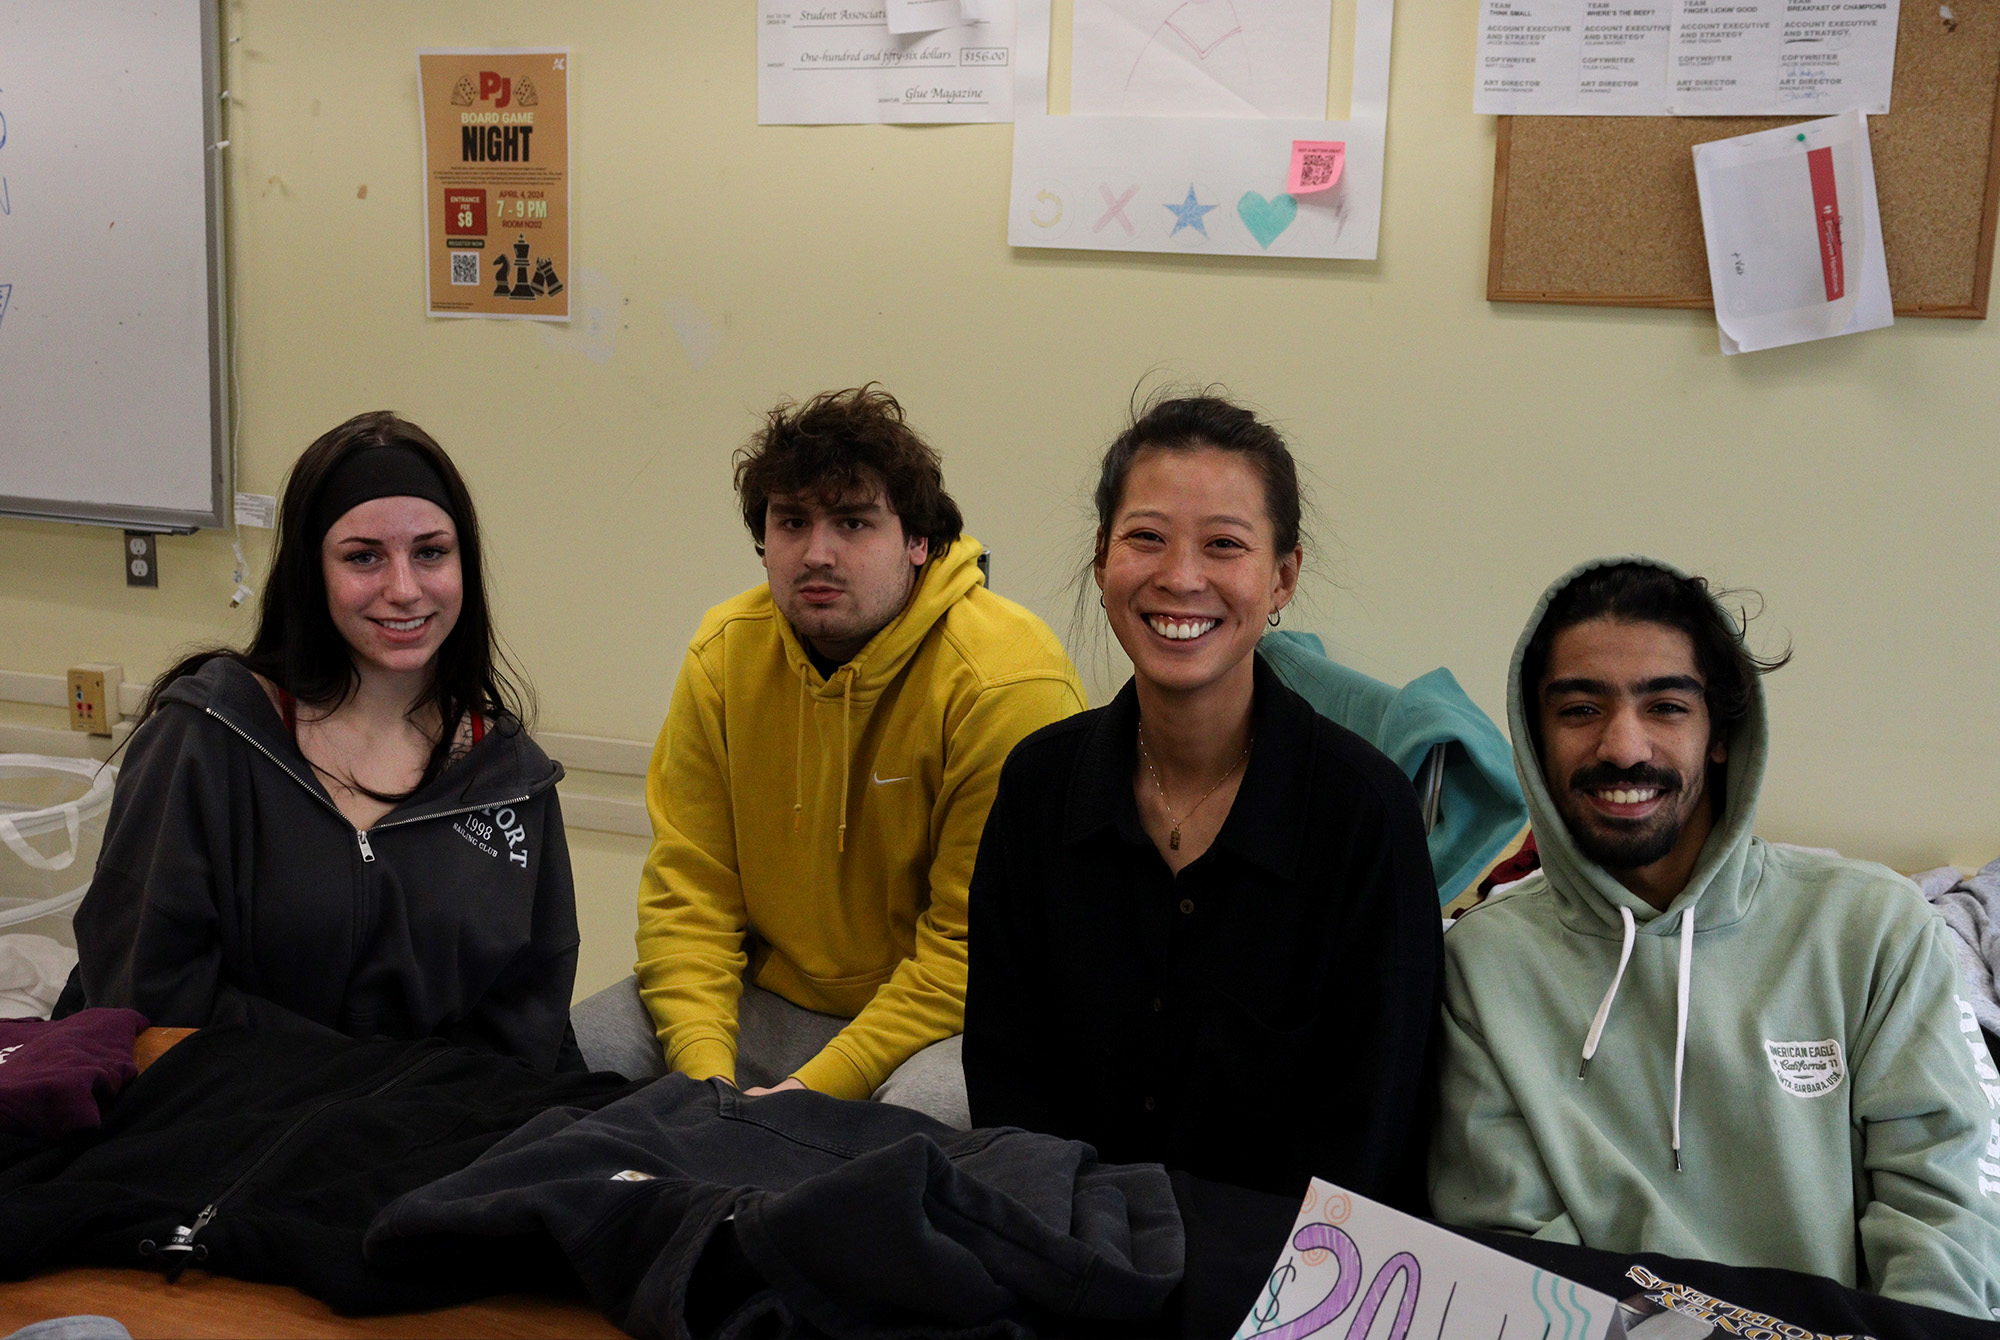 Makenna Warwick, Luka Kova, Bonnie Chan and Mehdi Sossey Alaoui helped organize a thrift shop on March 27. Ben Akongo (not shown) also provided help with the event.